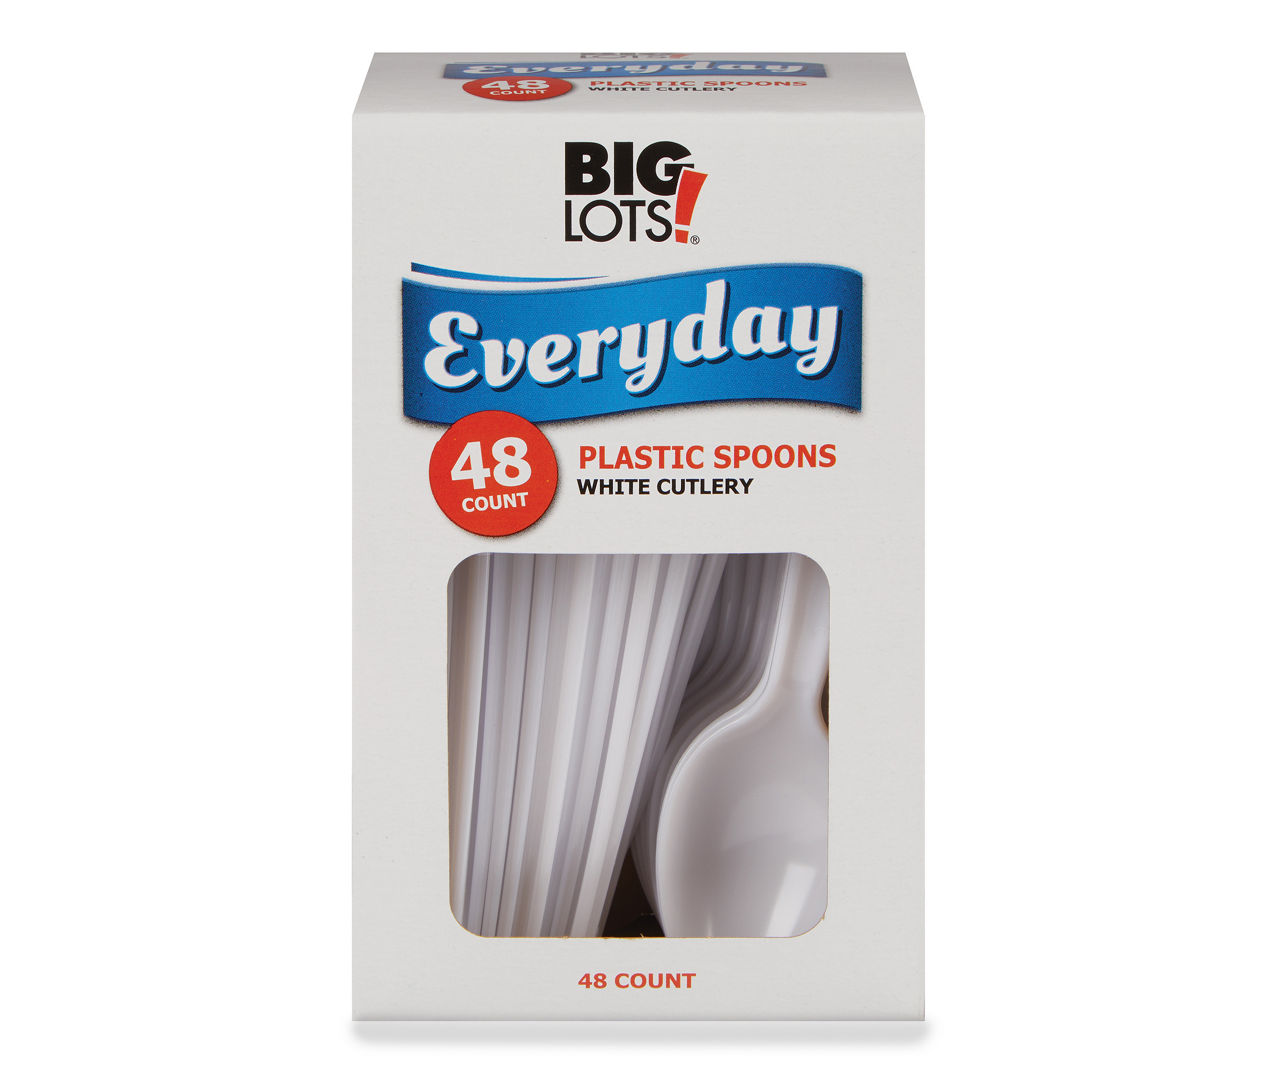 Big Lots Red Plastic 18 Oz. Heavy Duty Party Cups, 120-Count